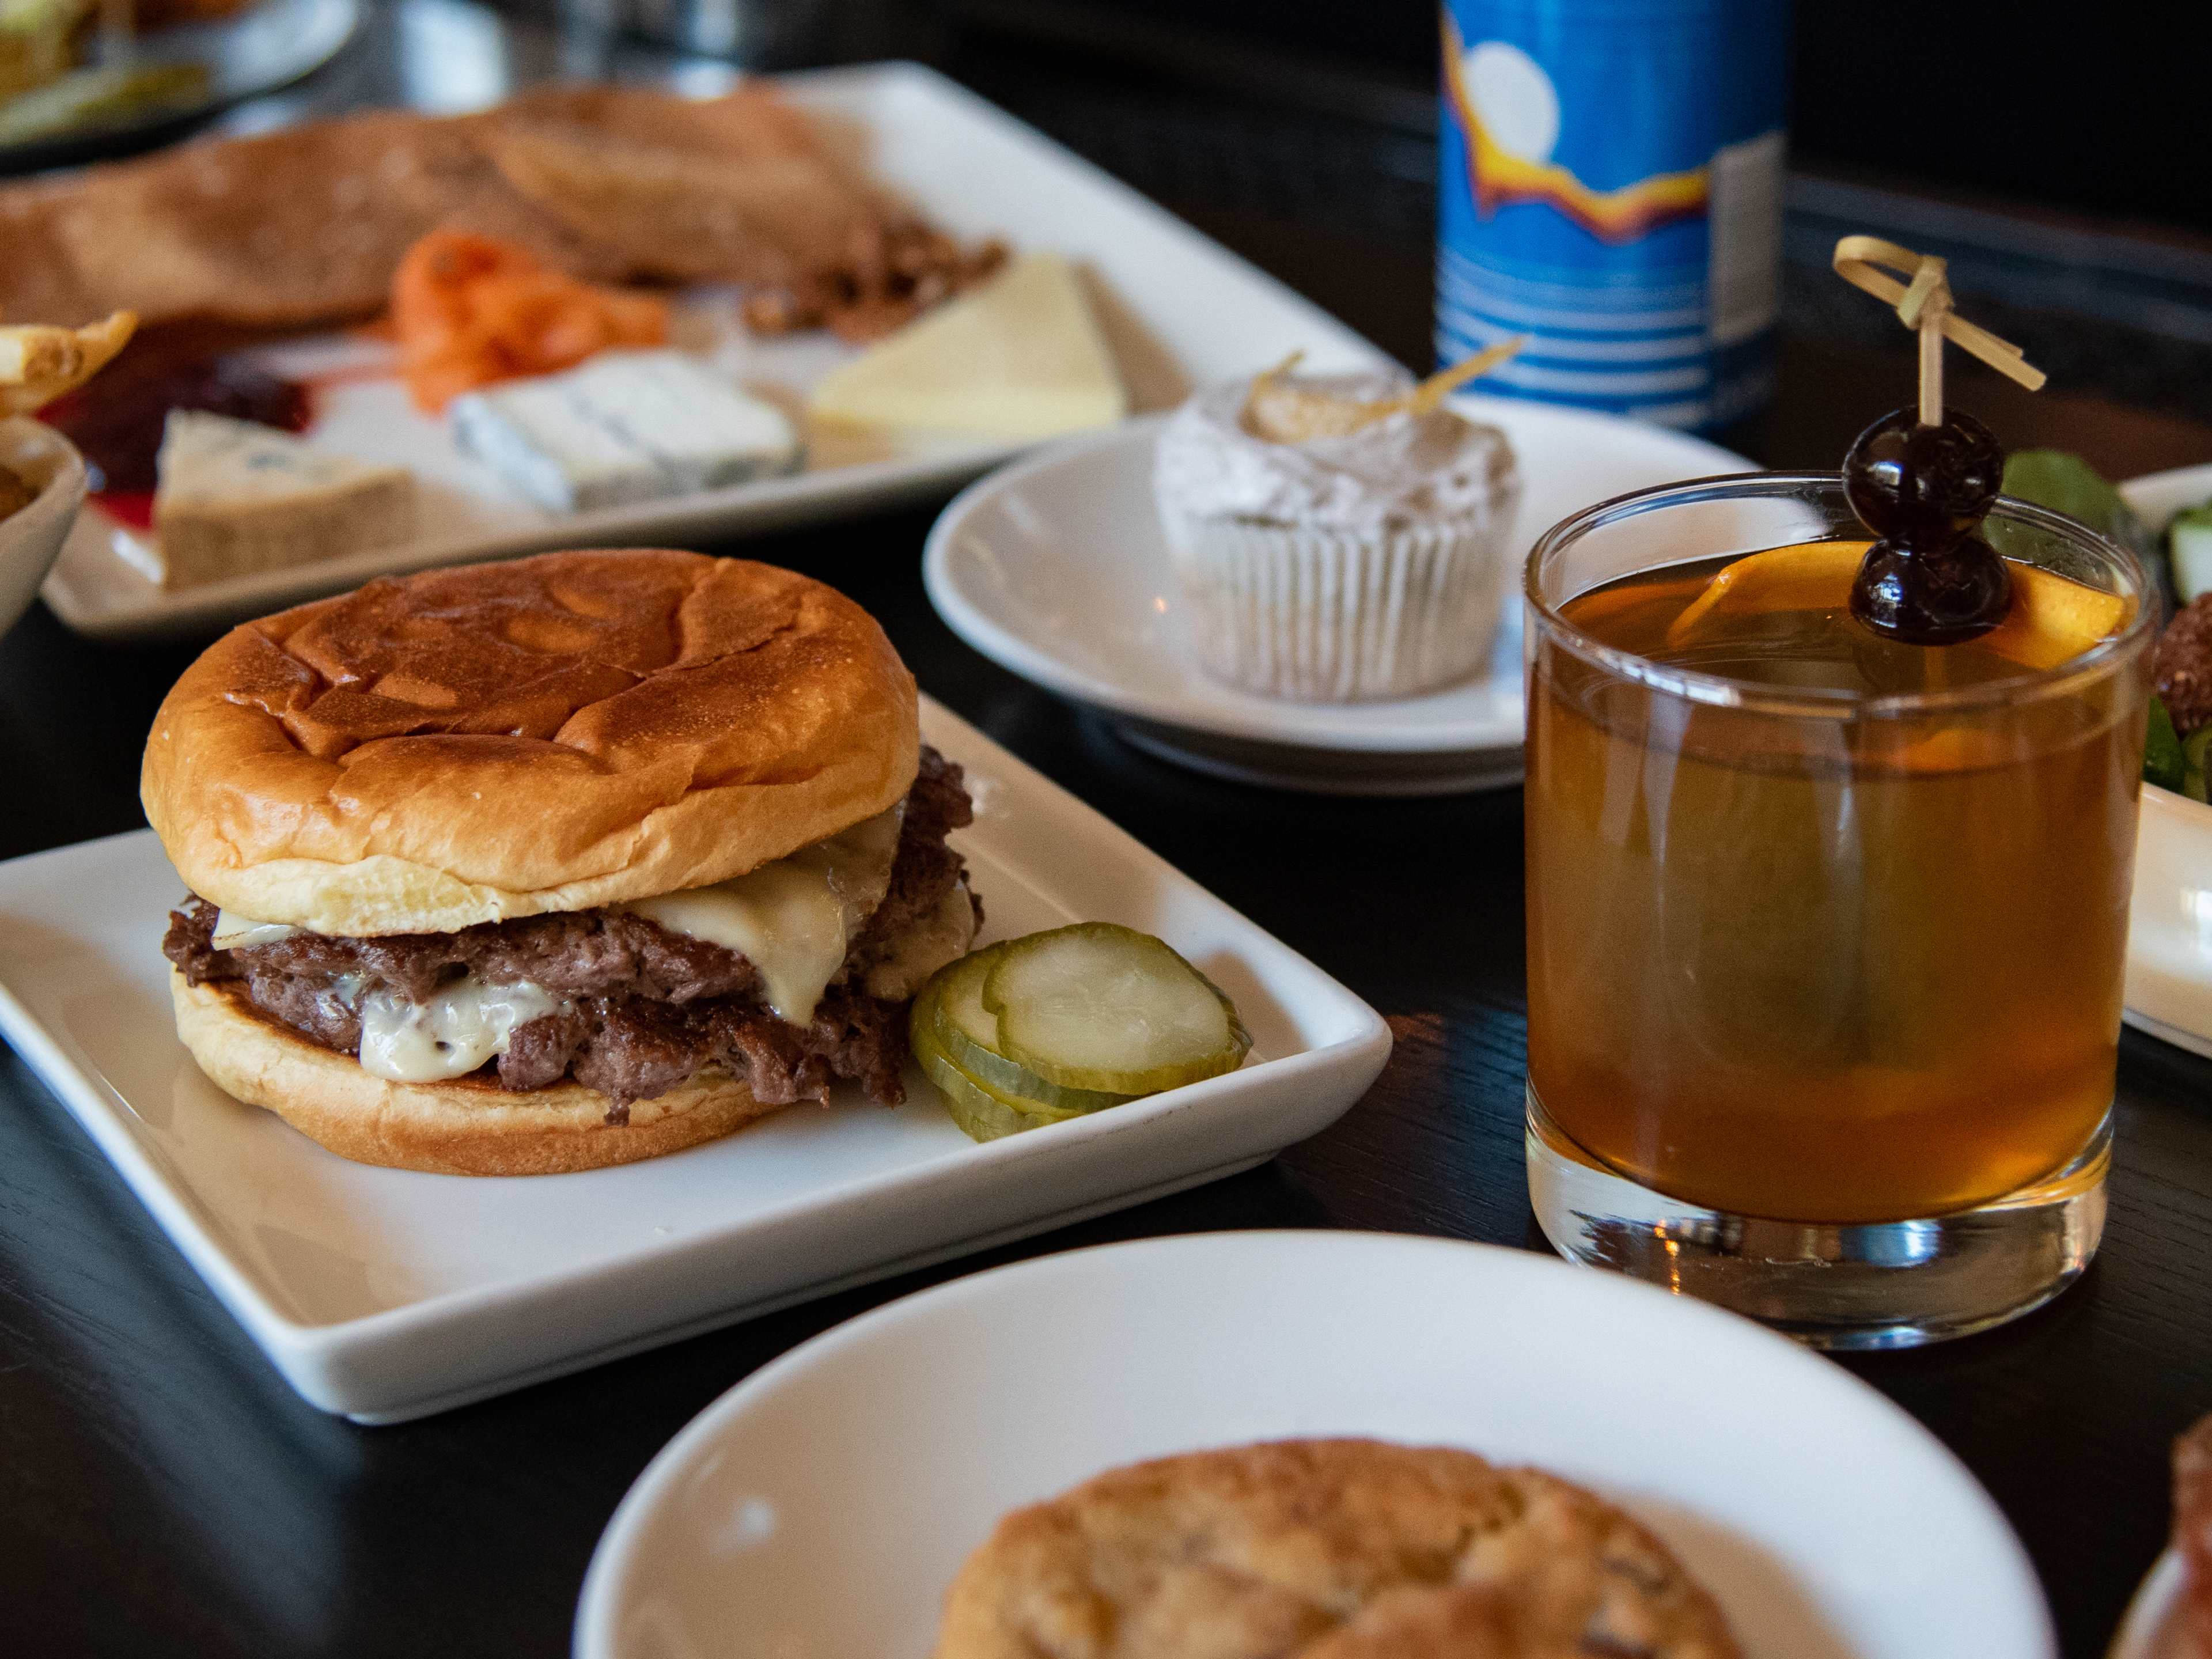 Spread of burgers, sides, and cocktails at Parlour